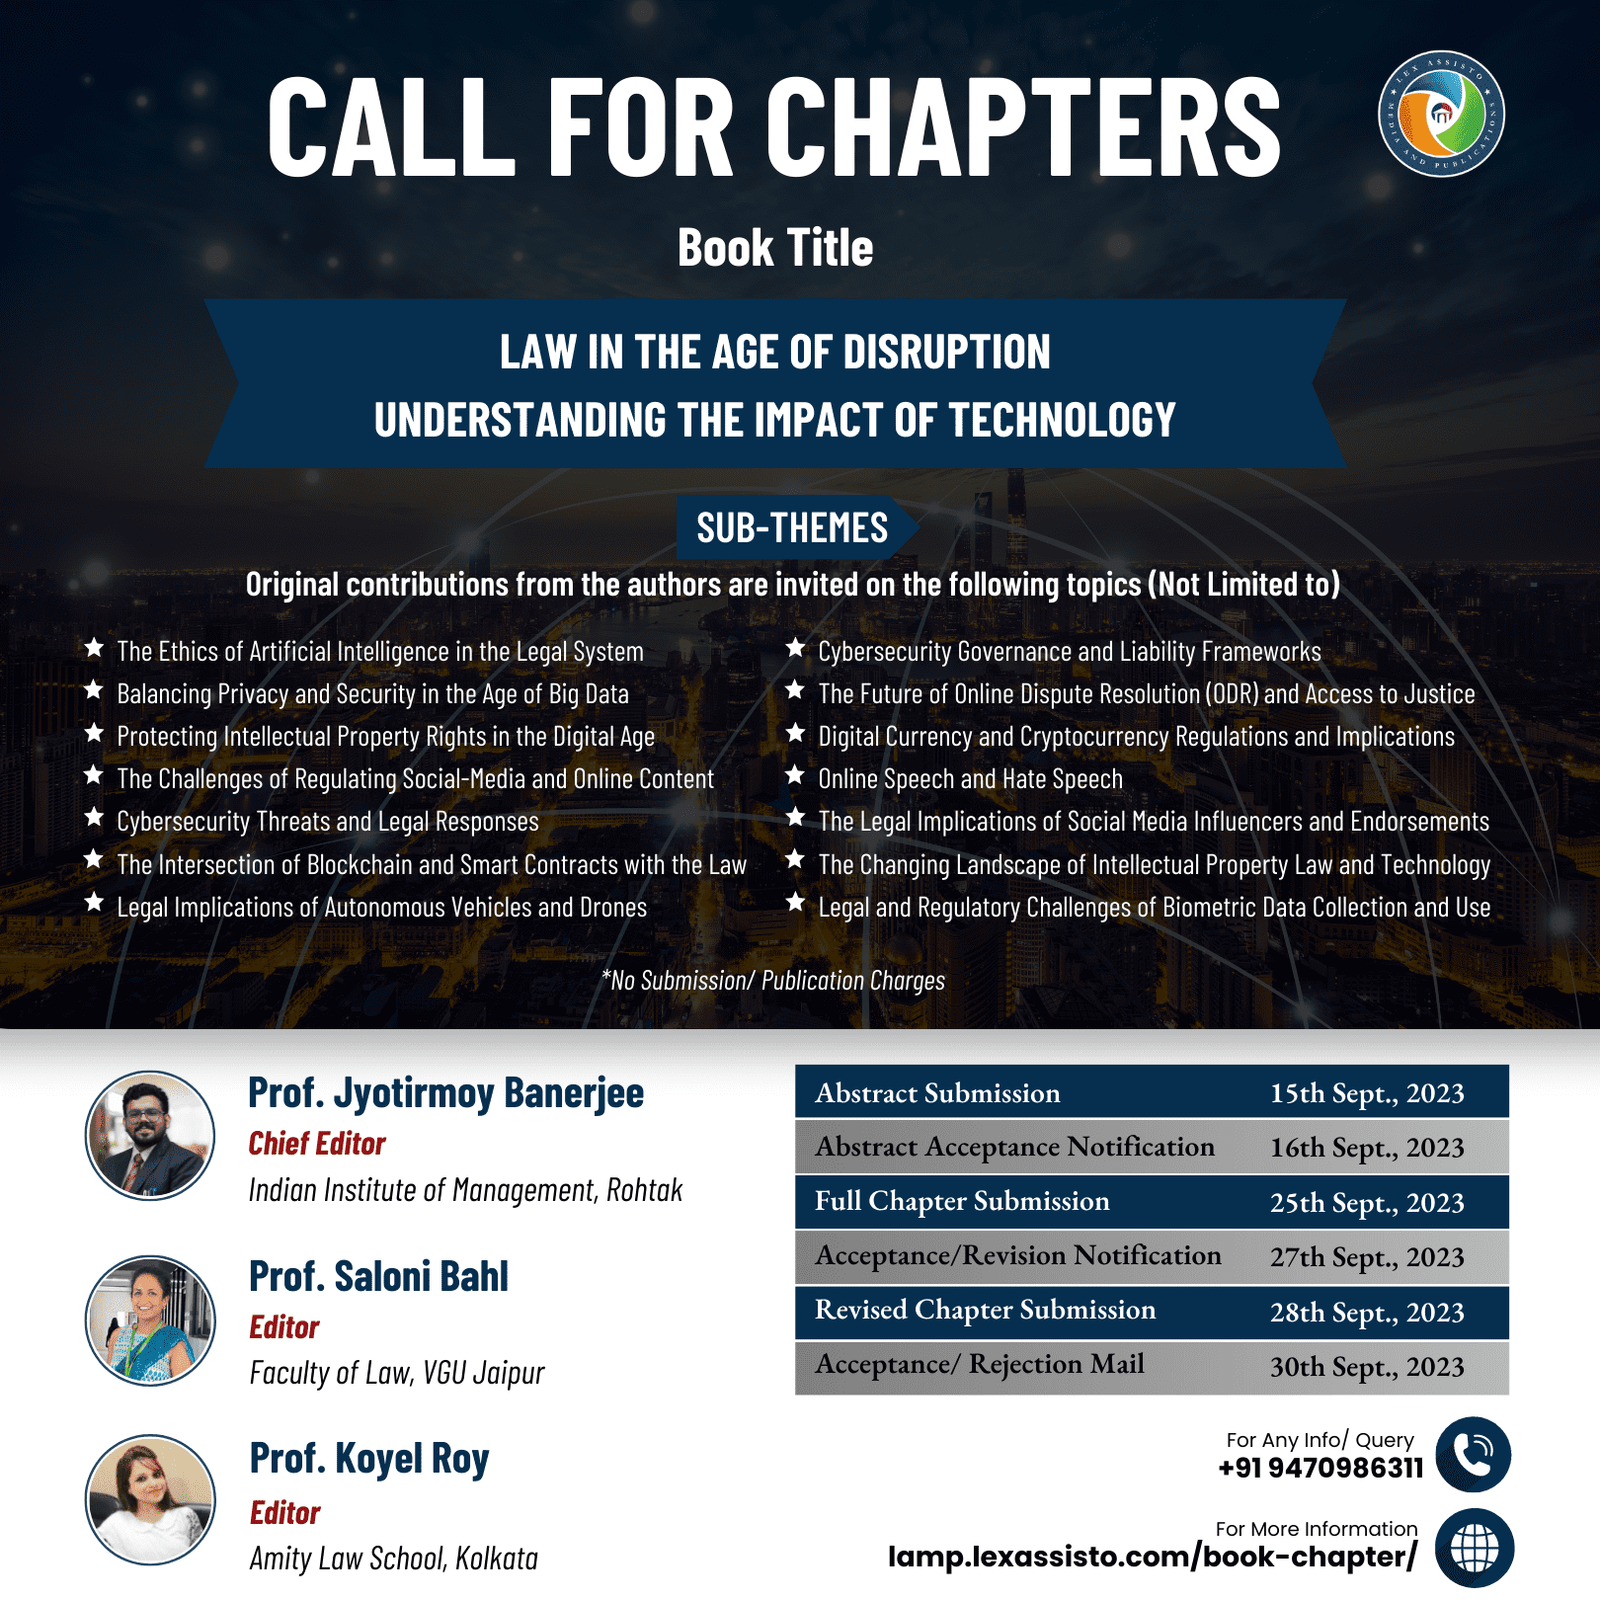 CALL FOR CHAPTERS BOOK ON LAW AND TECHNOLOGY SUBMISSION OPEN